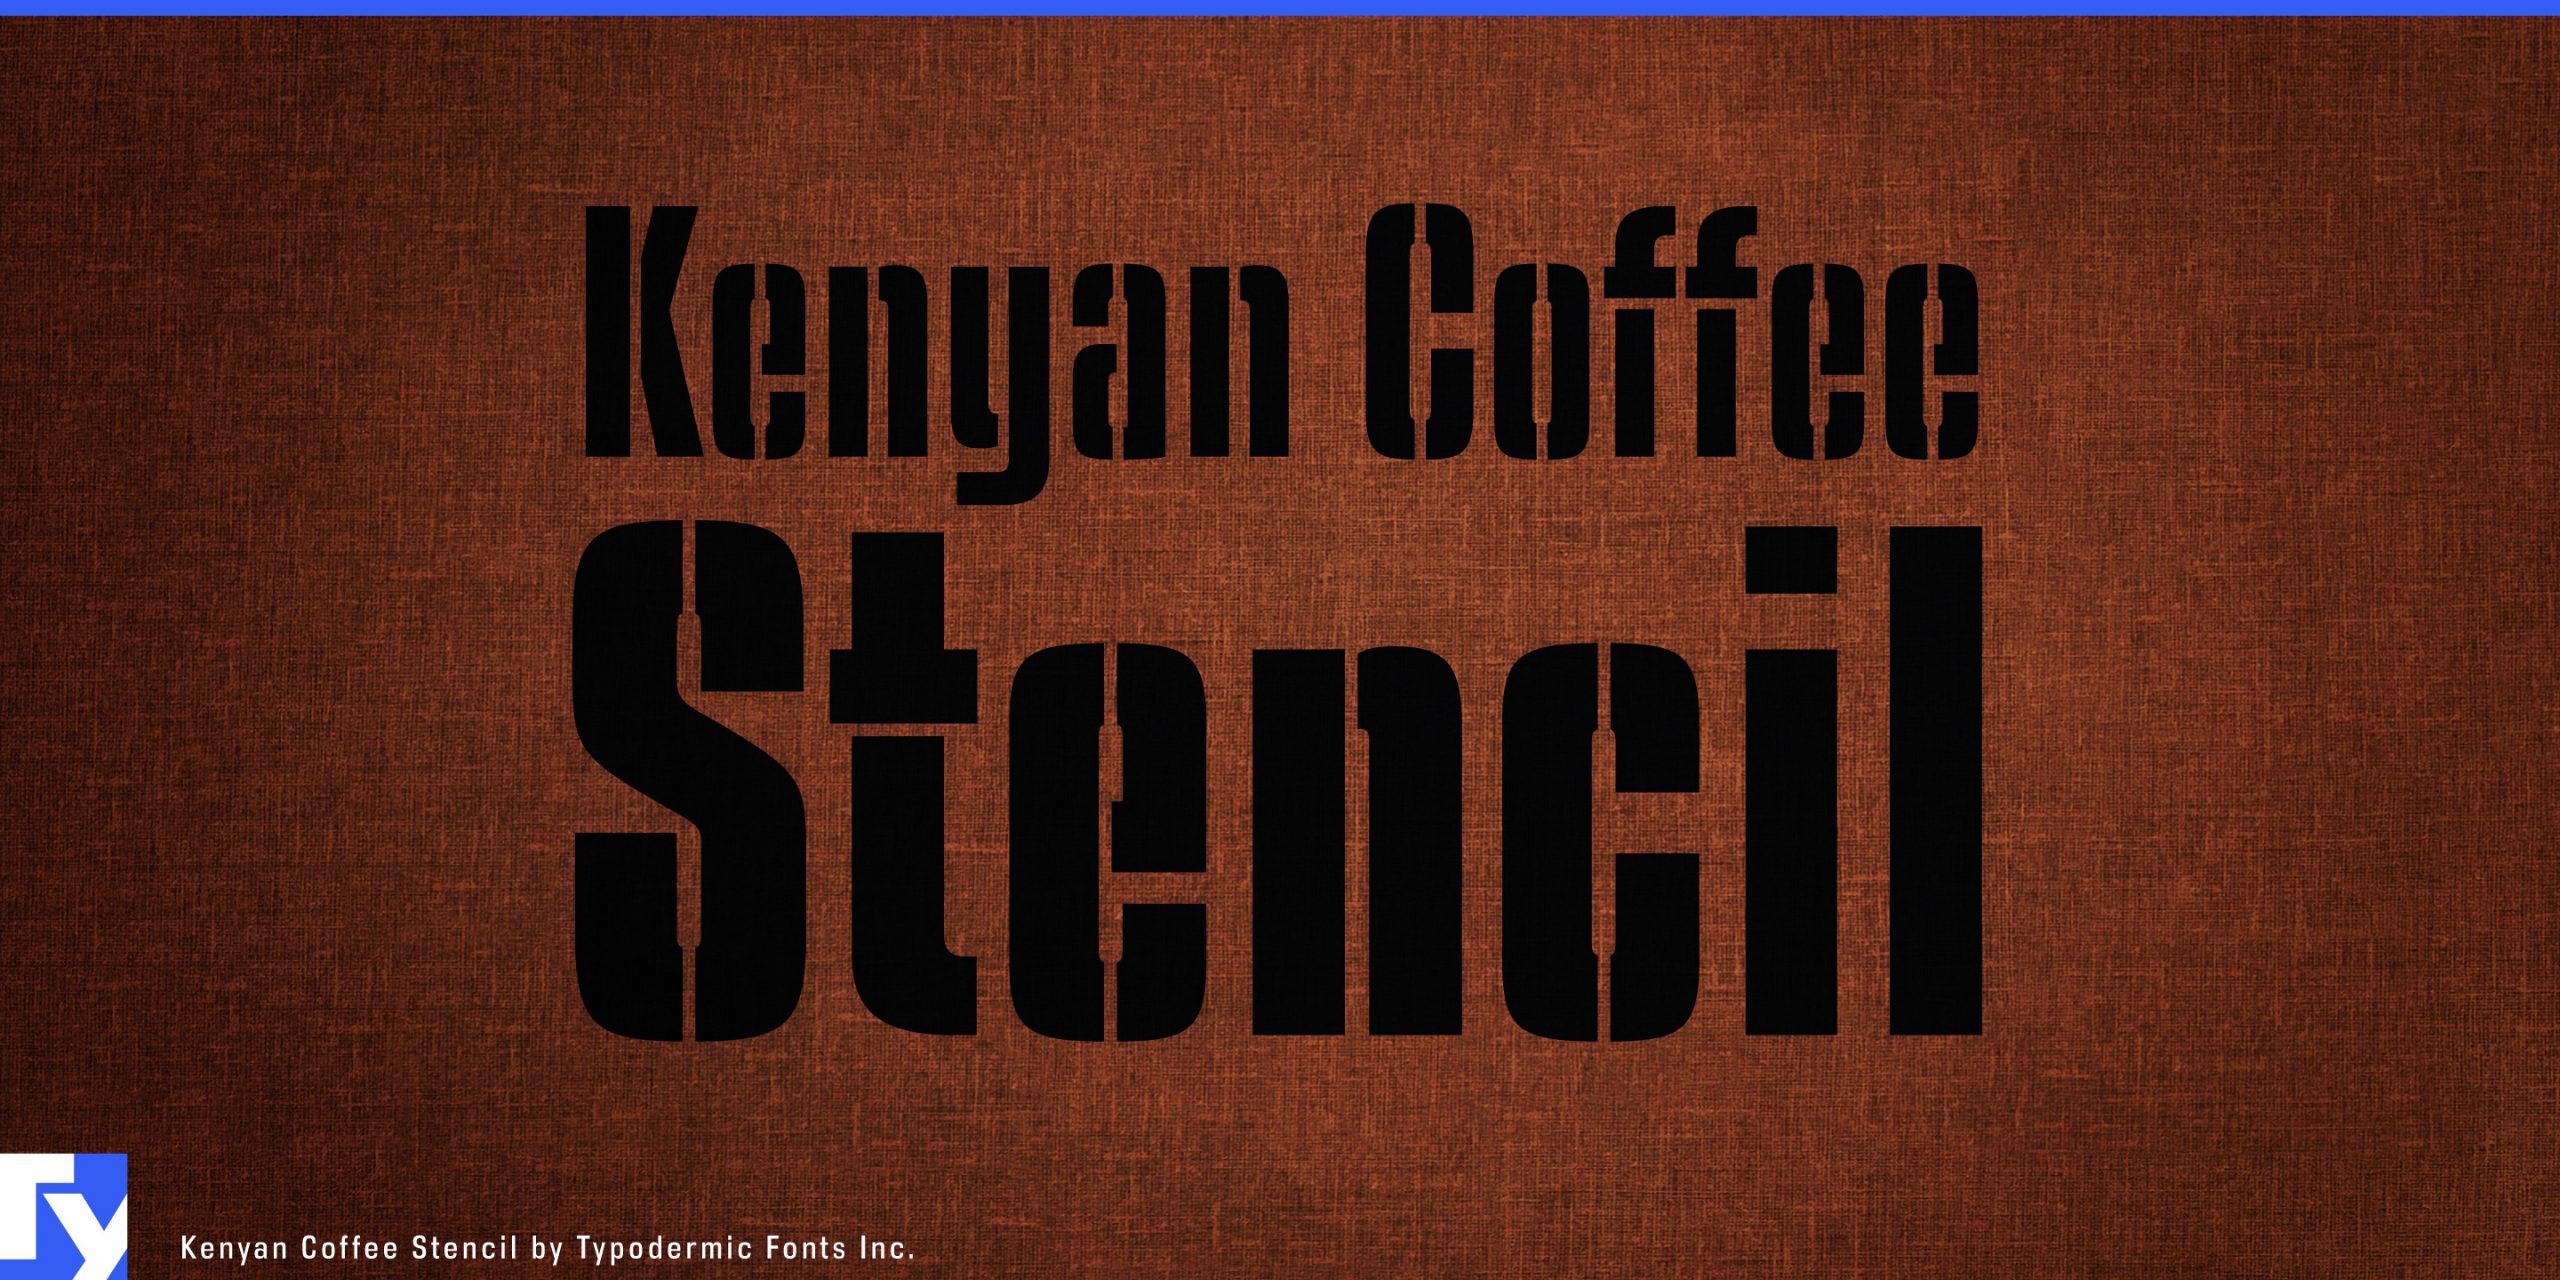 Industrial Chic: Kenyan Coffee Typeface in Action